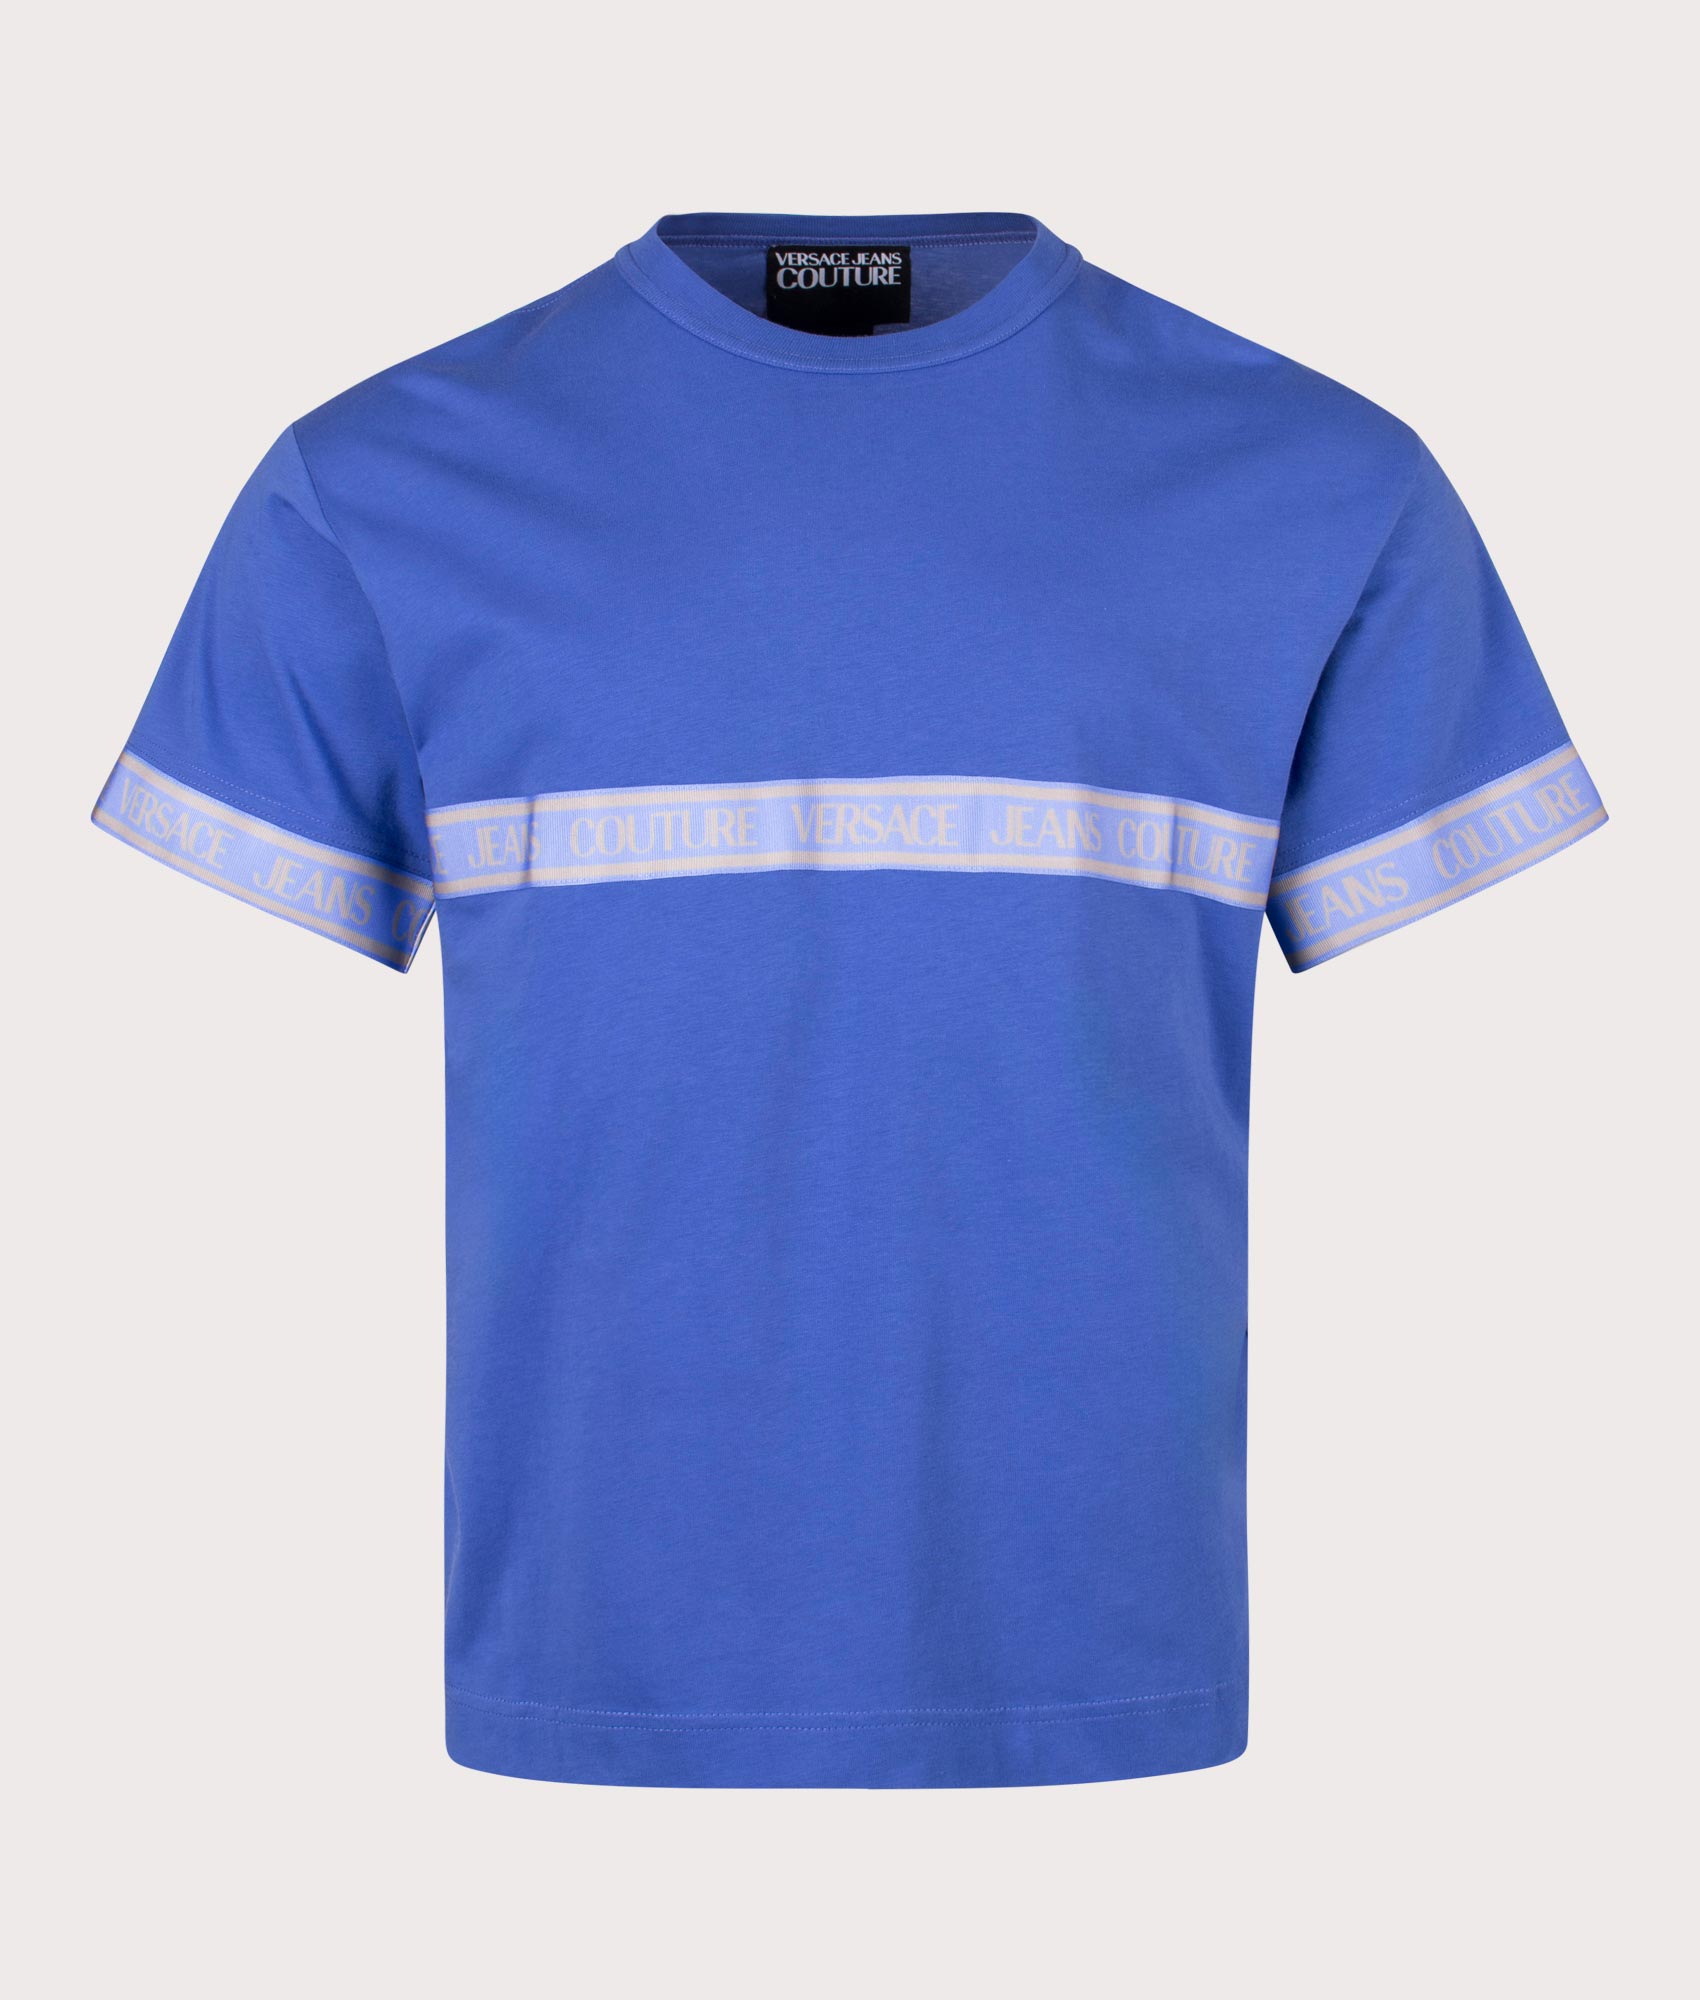 Versace Jeans Couture Mens Relaxed Fit R Taped T-Shirt - Colour: 205 Sapphire - Size: XL